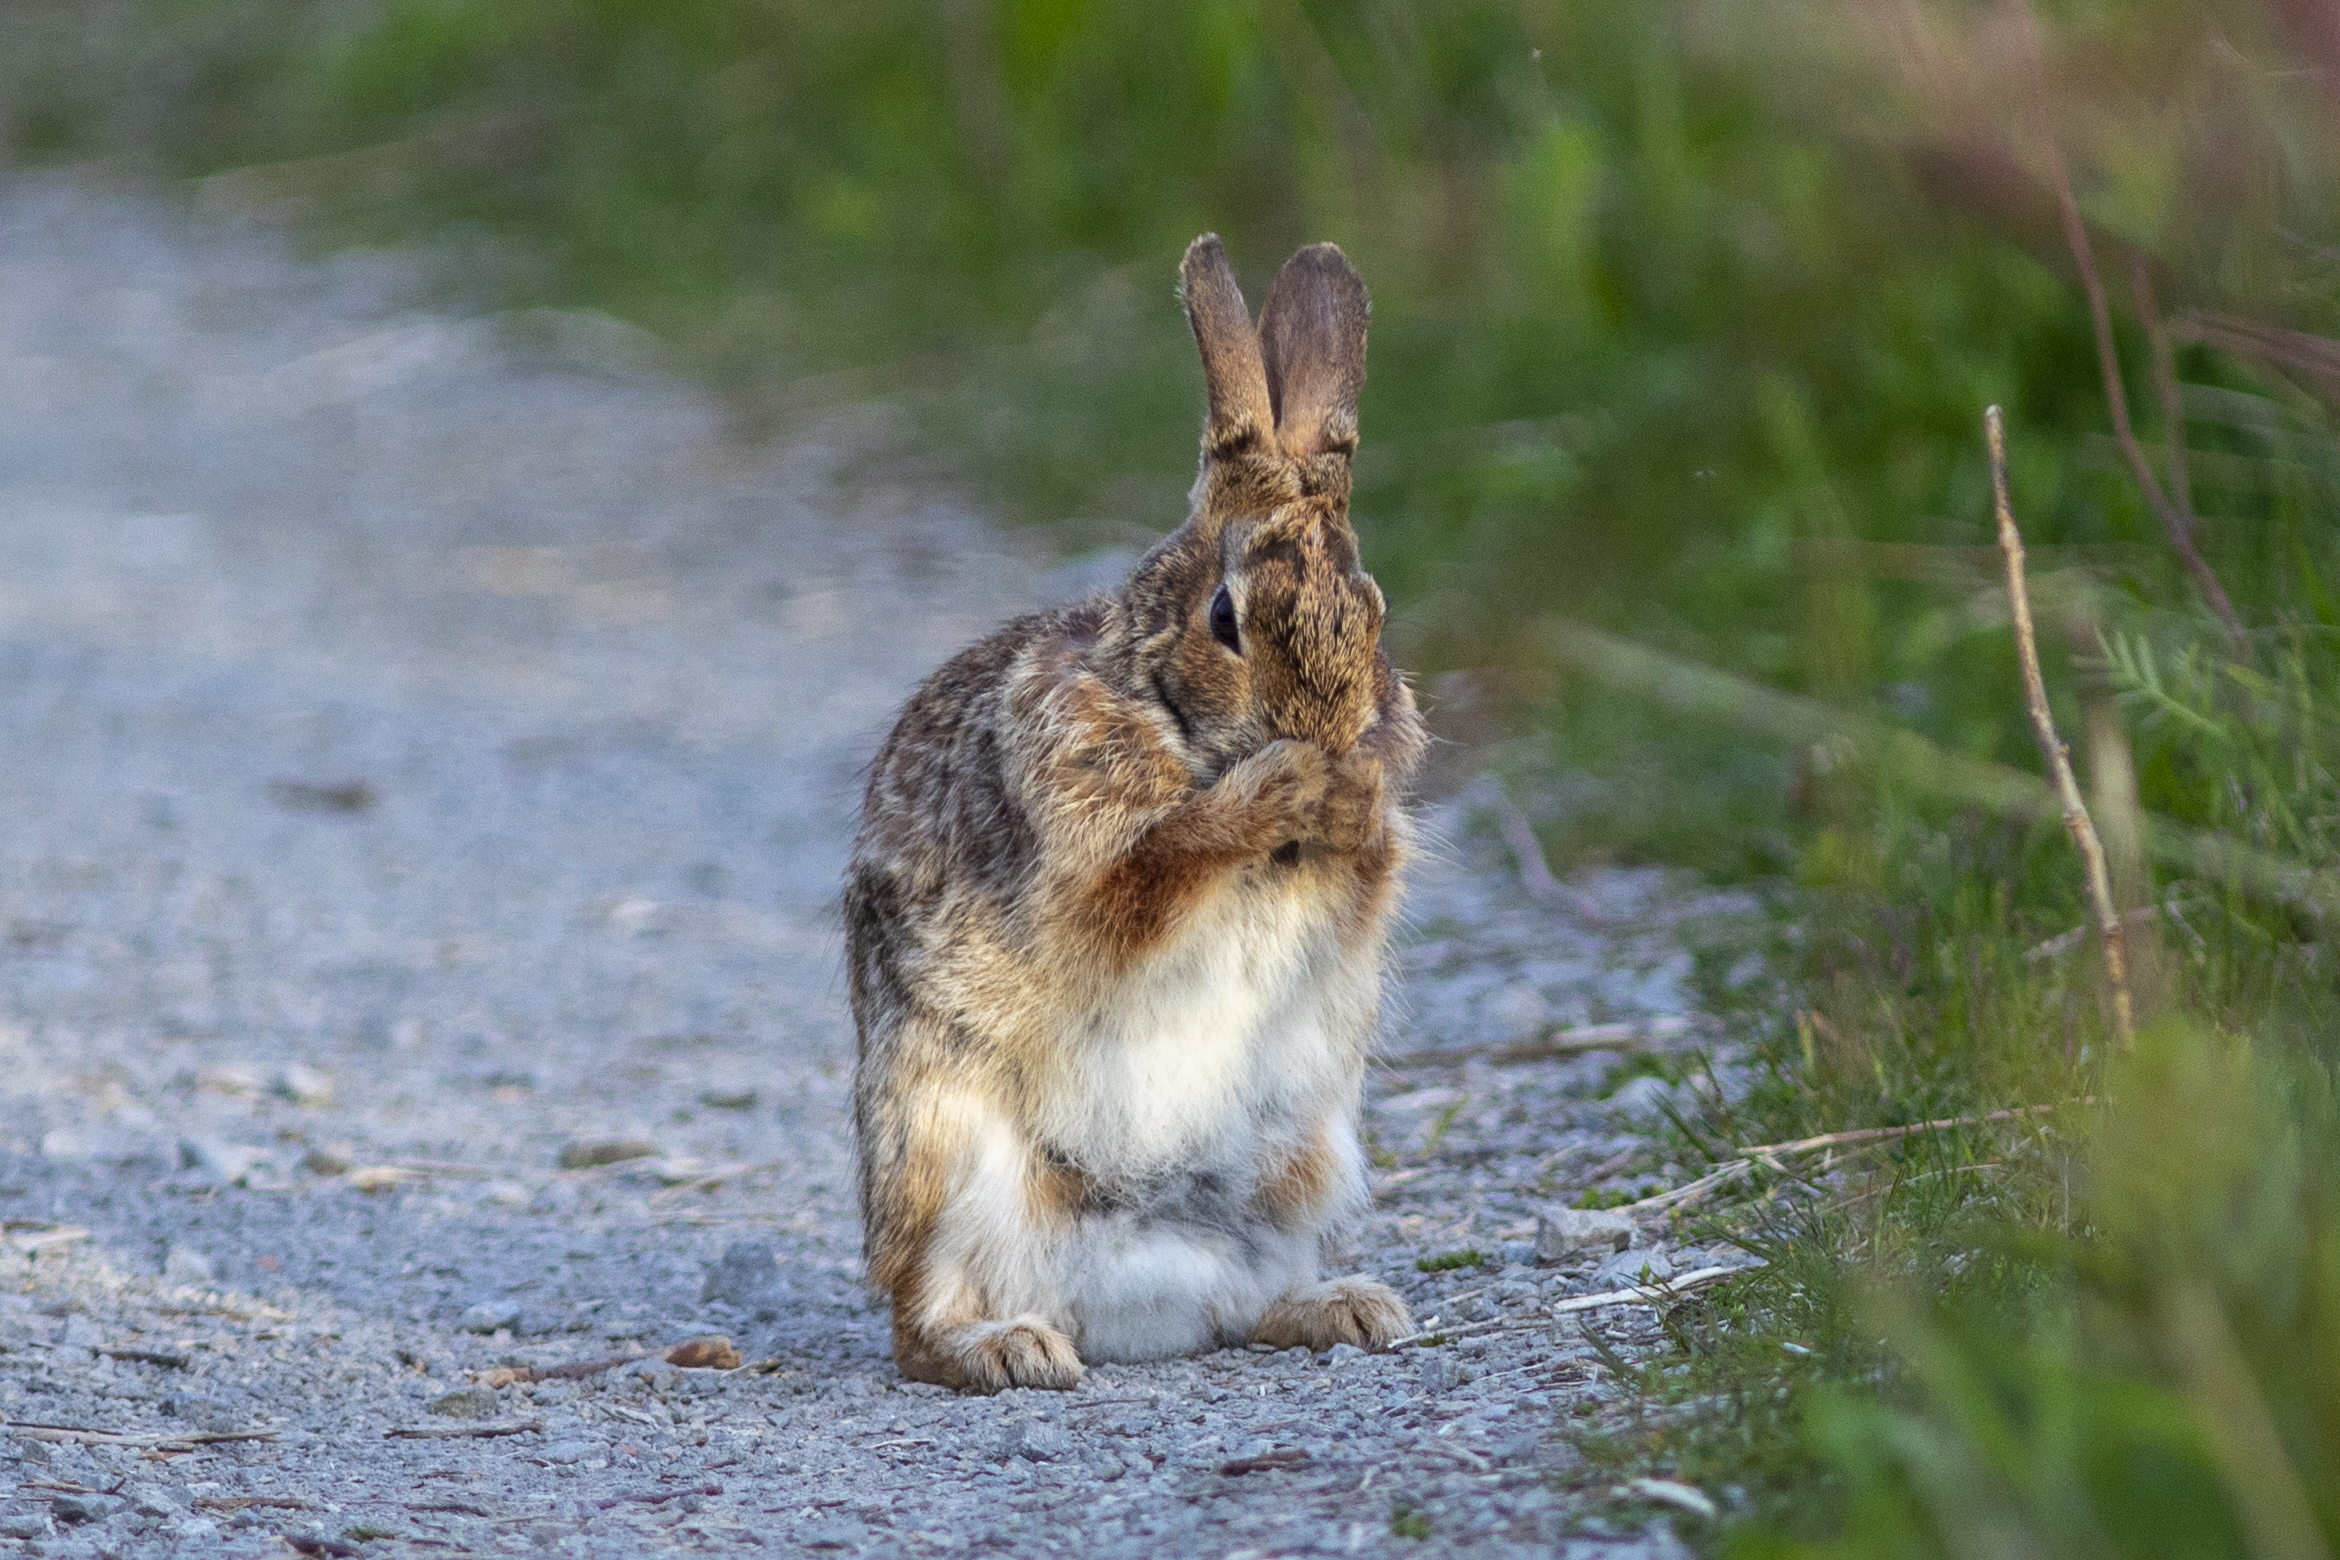 A rabbit holds its paws up to its face, standing at the edge of a pathway in Tommy Thompson Park.